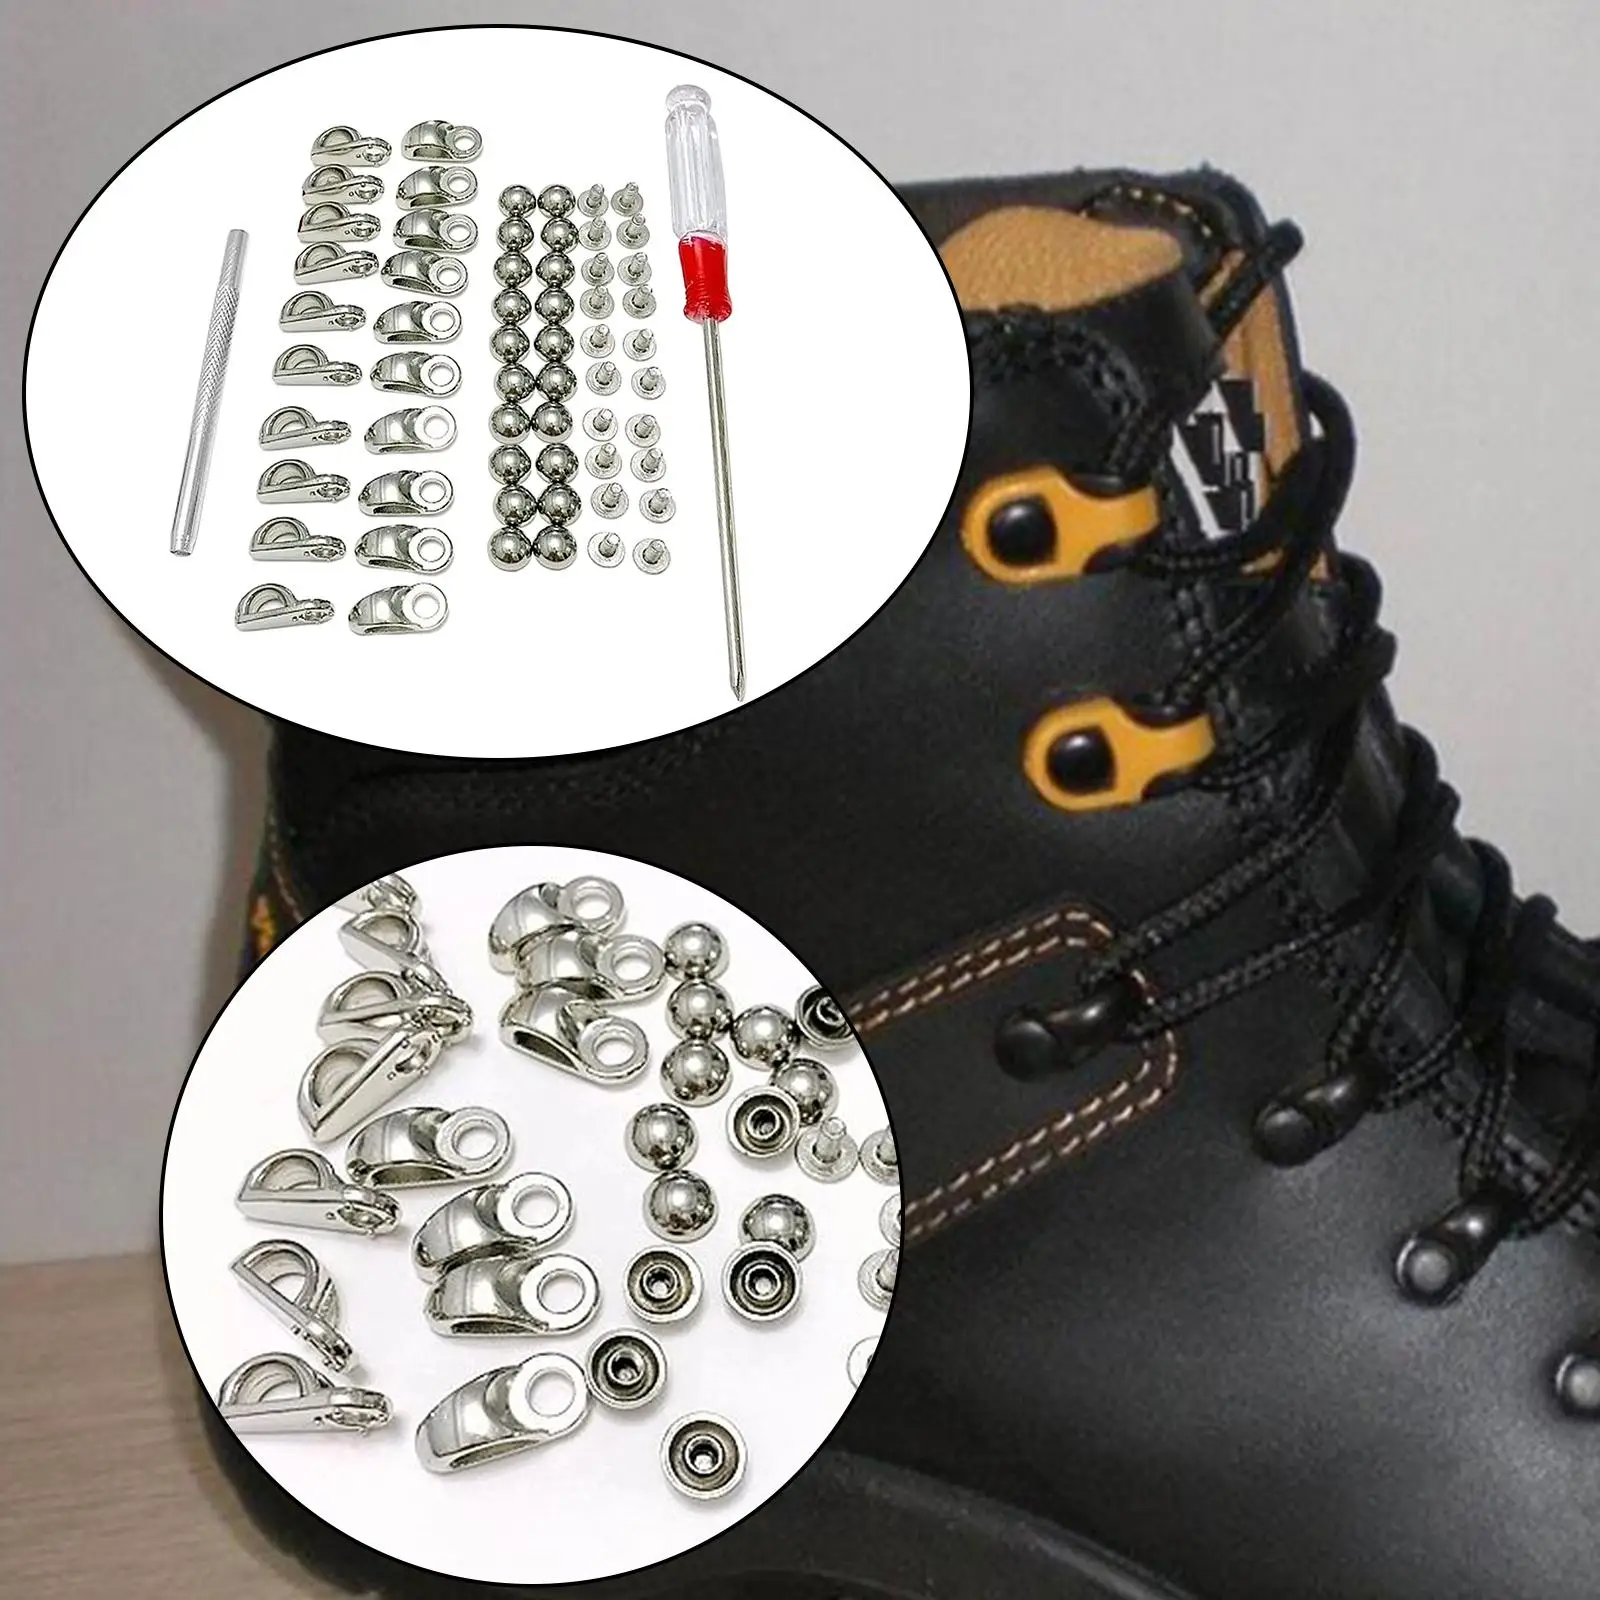 Dilwe Boot Lace Hooks, 20Pcs/Set Boot Hooks Lace Fittings with Rivets for  Repair/Camp/Hike/Climb Accessories, Boot Hooks Lace Fittings